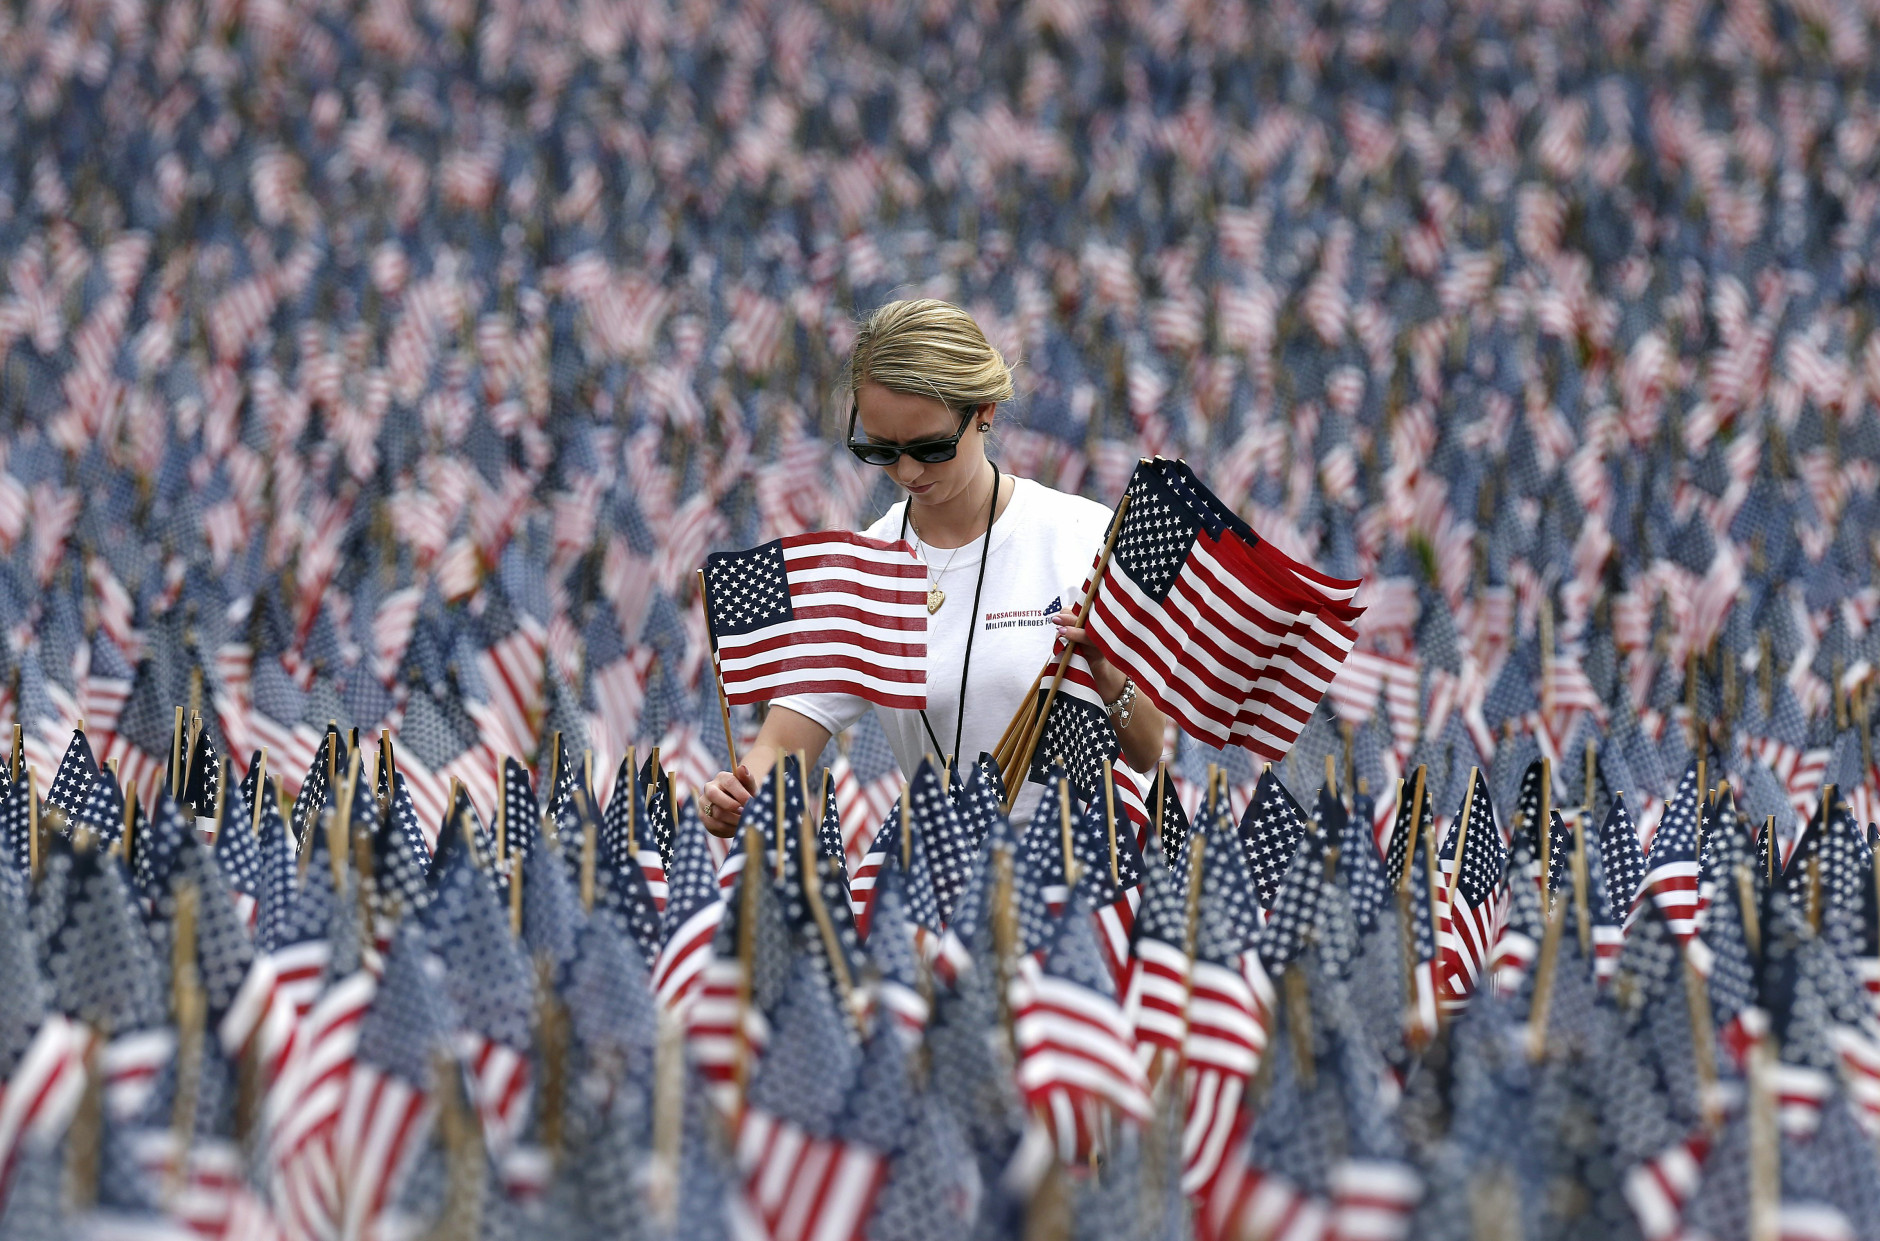 Shannon Day, of Boston, a volunteer with Massachusetts Military Heroes Fund, replaces damaged flags in the fund's flag garden on Boston Common in Boston, ahead of Memorial Day, Thursday, May 21 2015. Each of the approximately 37,000 flags represents a Massachusetts military member who died in service from the Revolutionary War to the present. (AP Photo/Michael Dwyer)